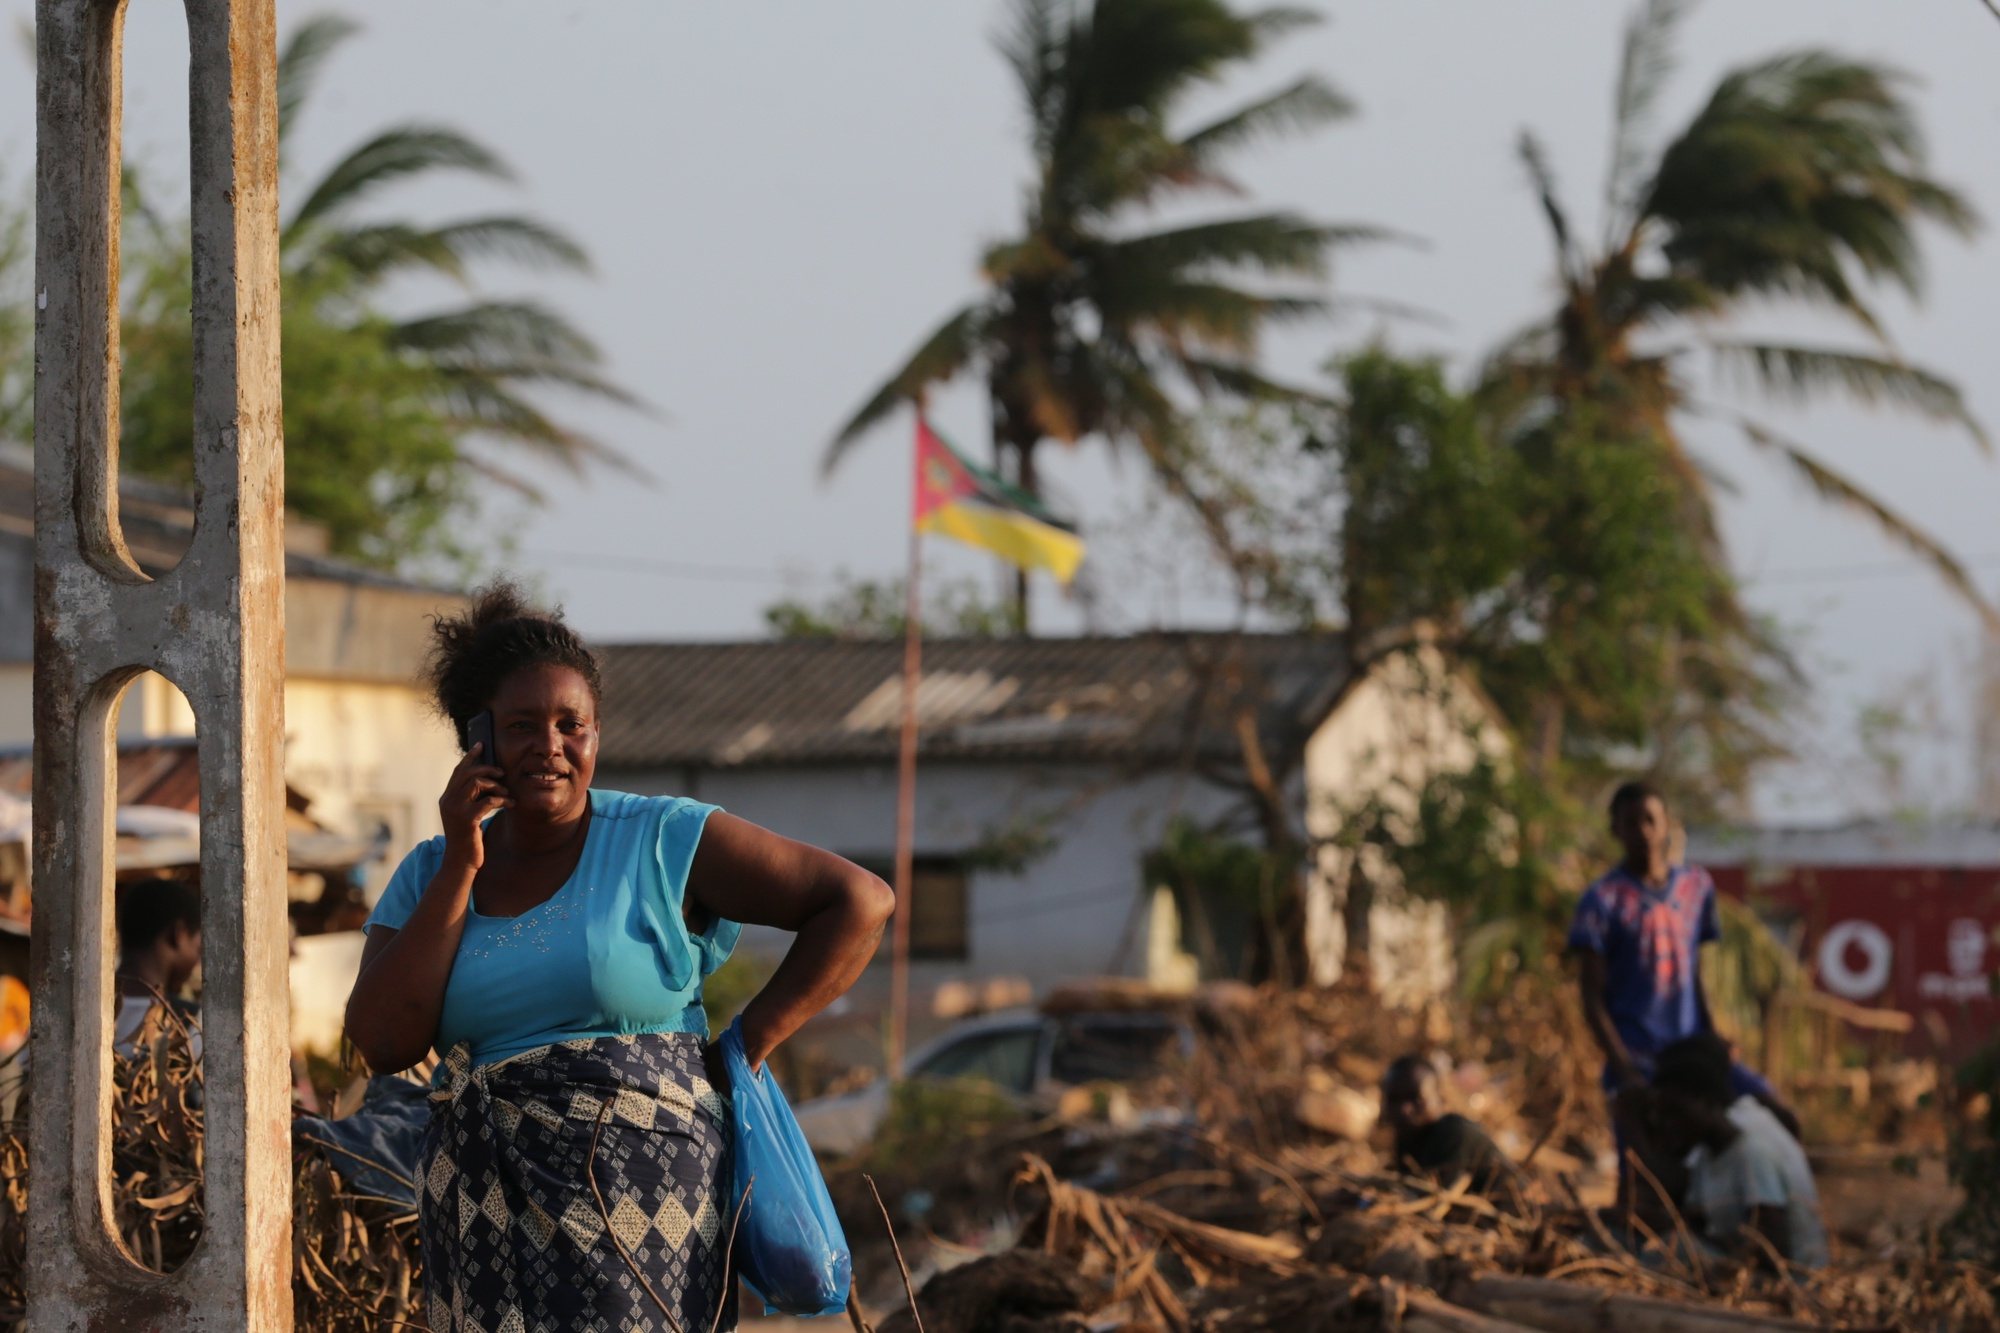 A woman talking on her cell phone to relatives in the village of Buzi, after the passage of cyclone Idai, in the province of Sofala, central Mozambique, 27 March 2019. Reports state that some 1.7 million people are said to be affected across southern Africa. TIAGO PETINGA/LUSA